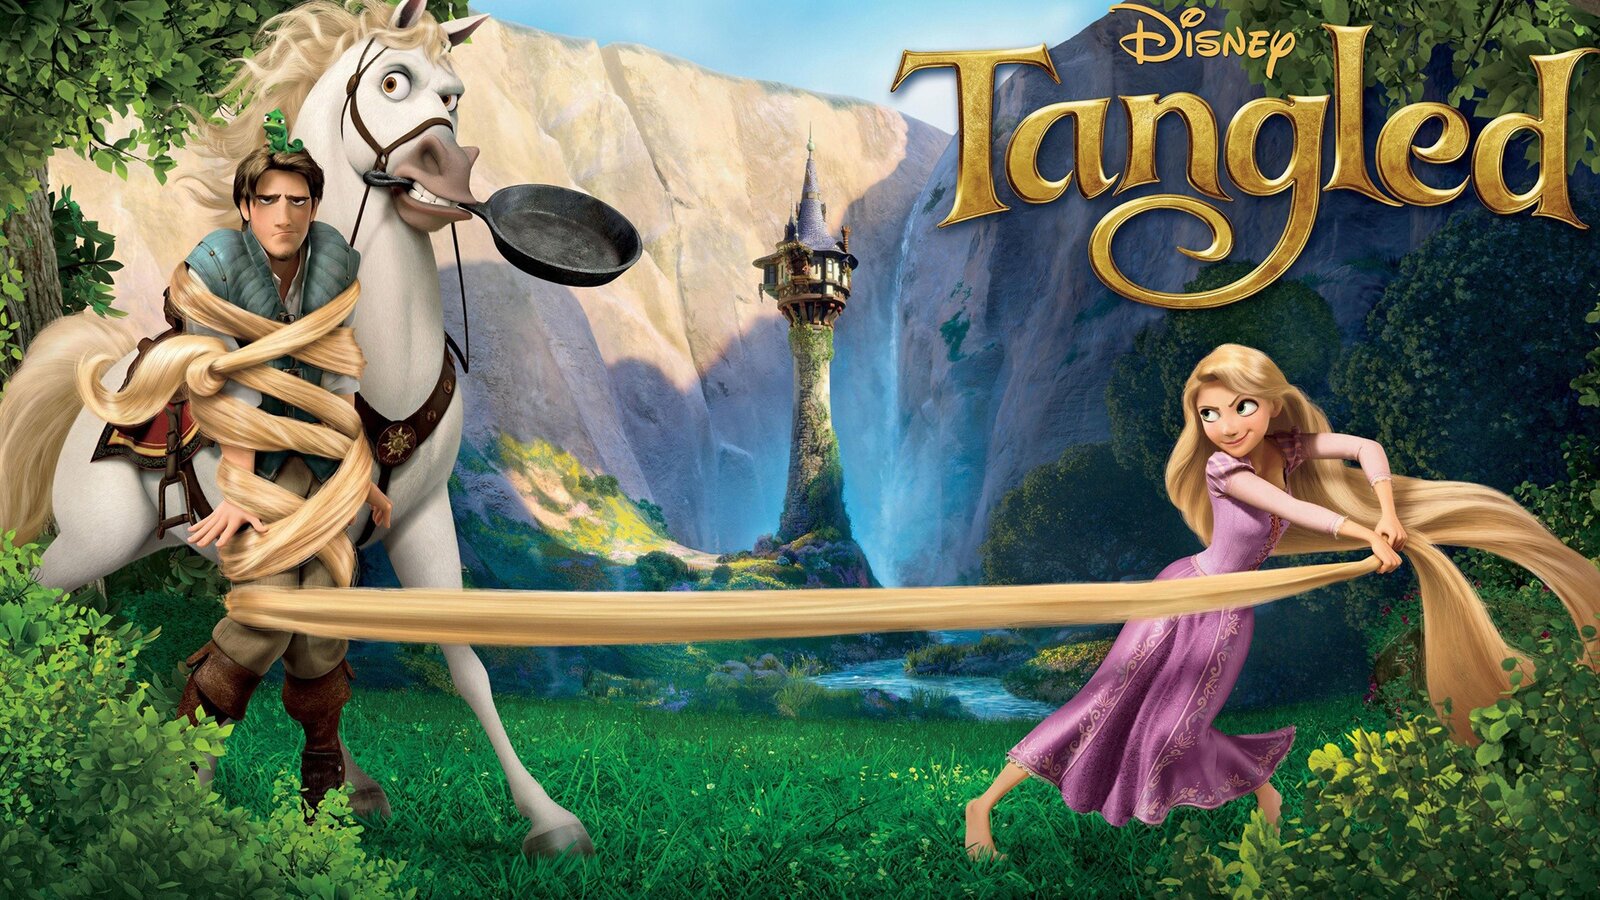 Disney Tangled : The Video Game